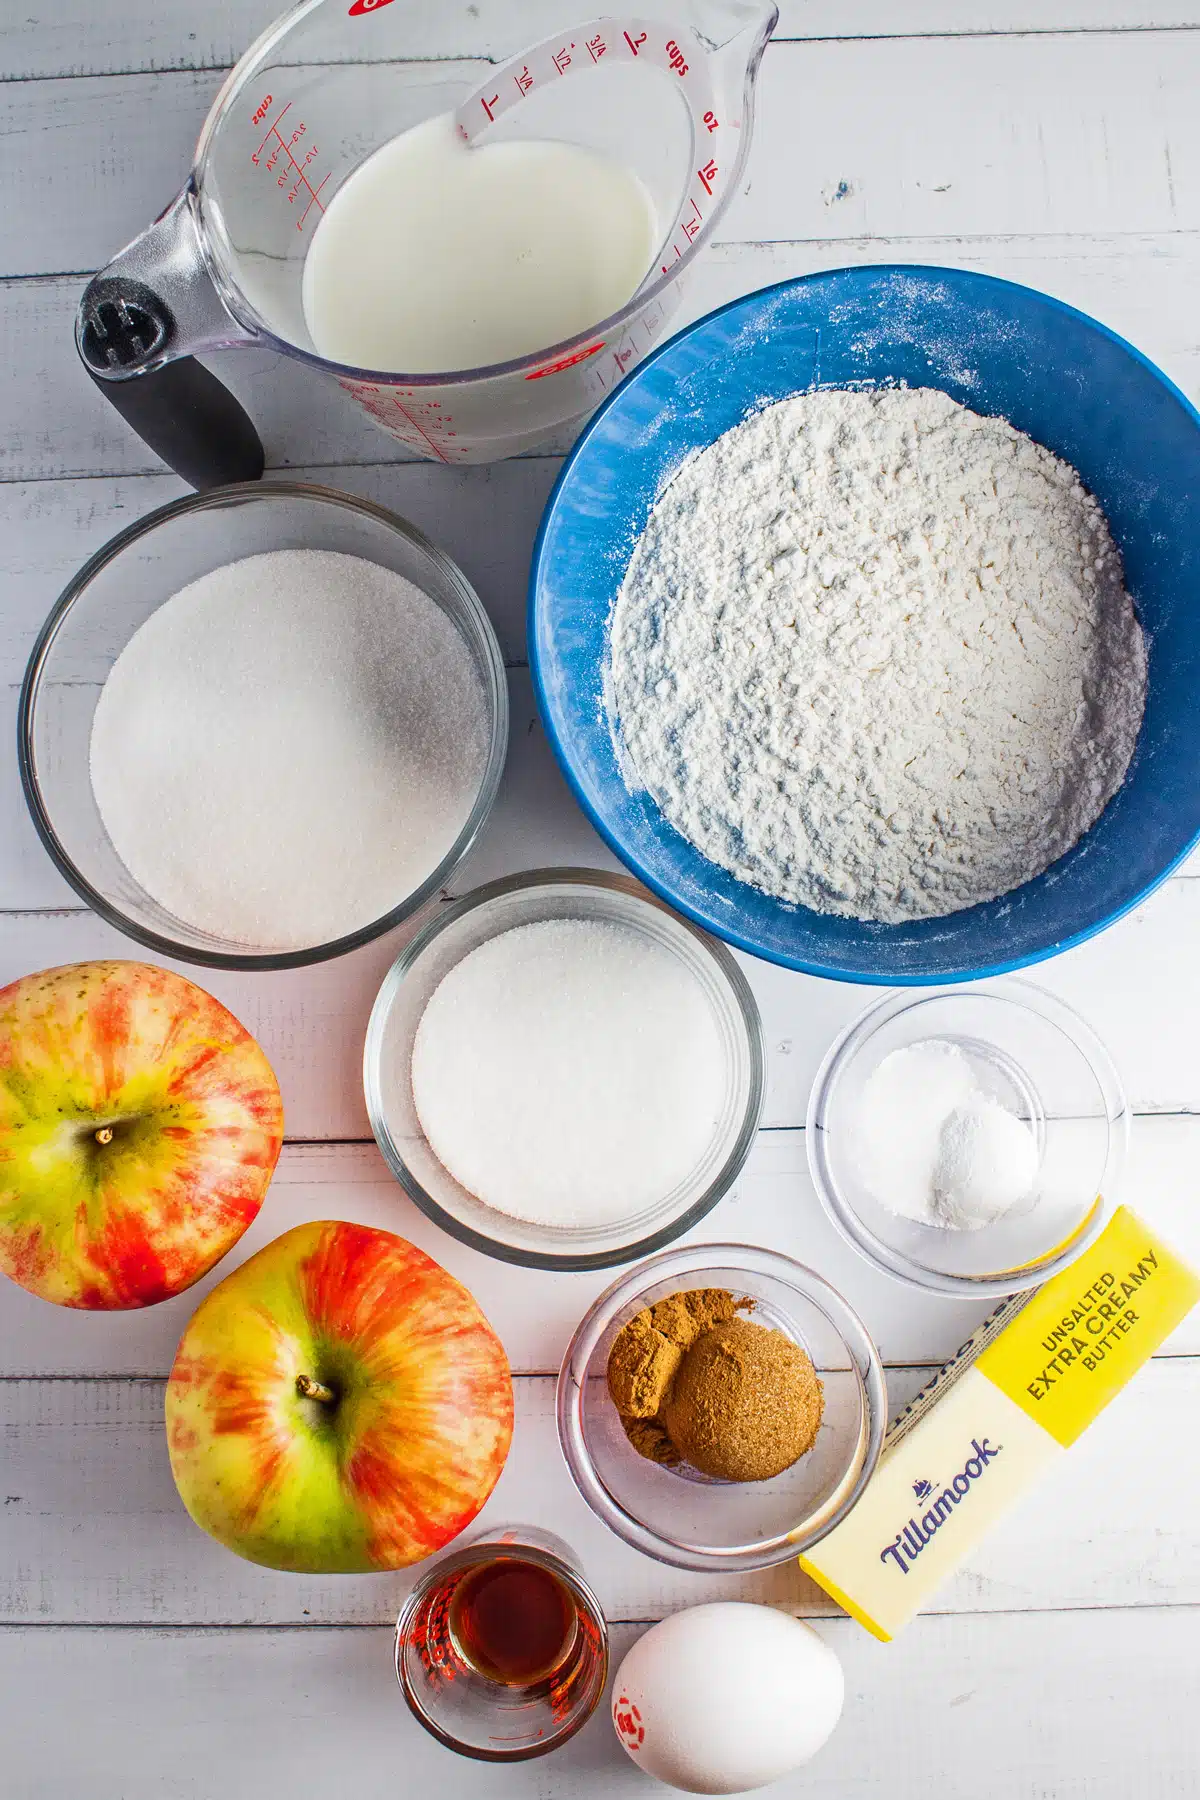 Dutch apple cake ingredients measured out and ready to start baking.